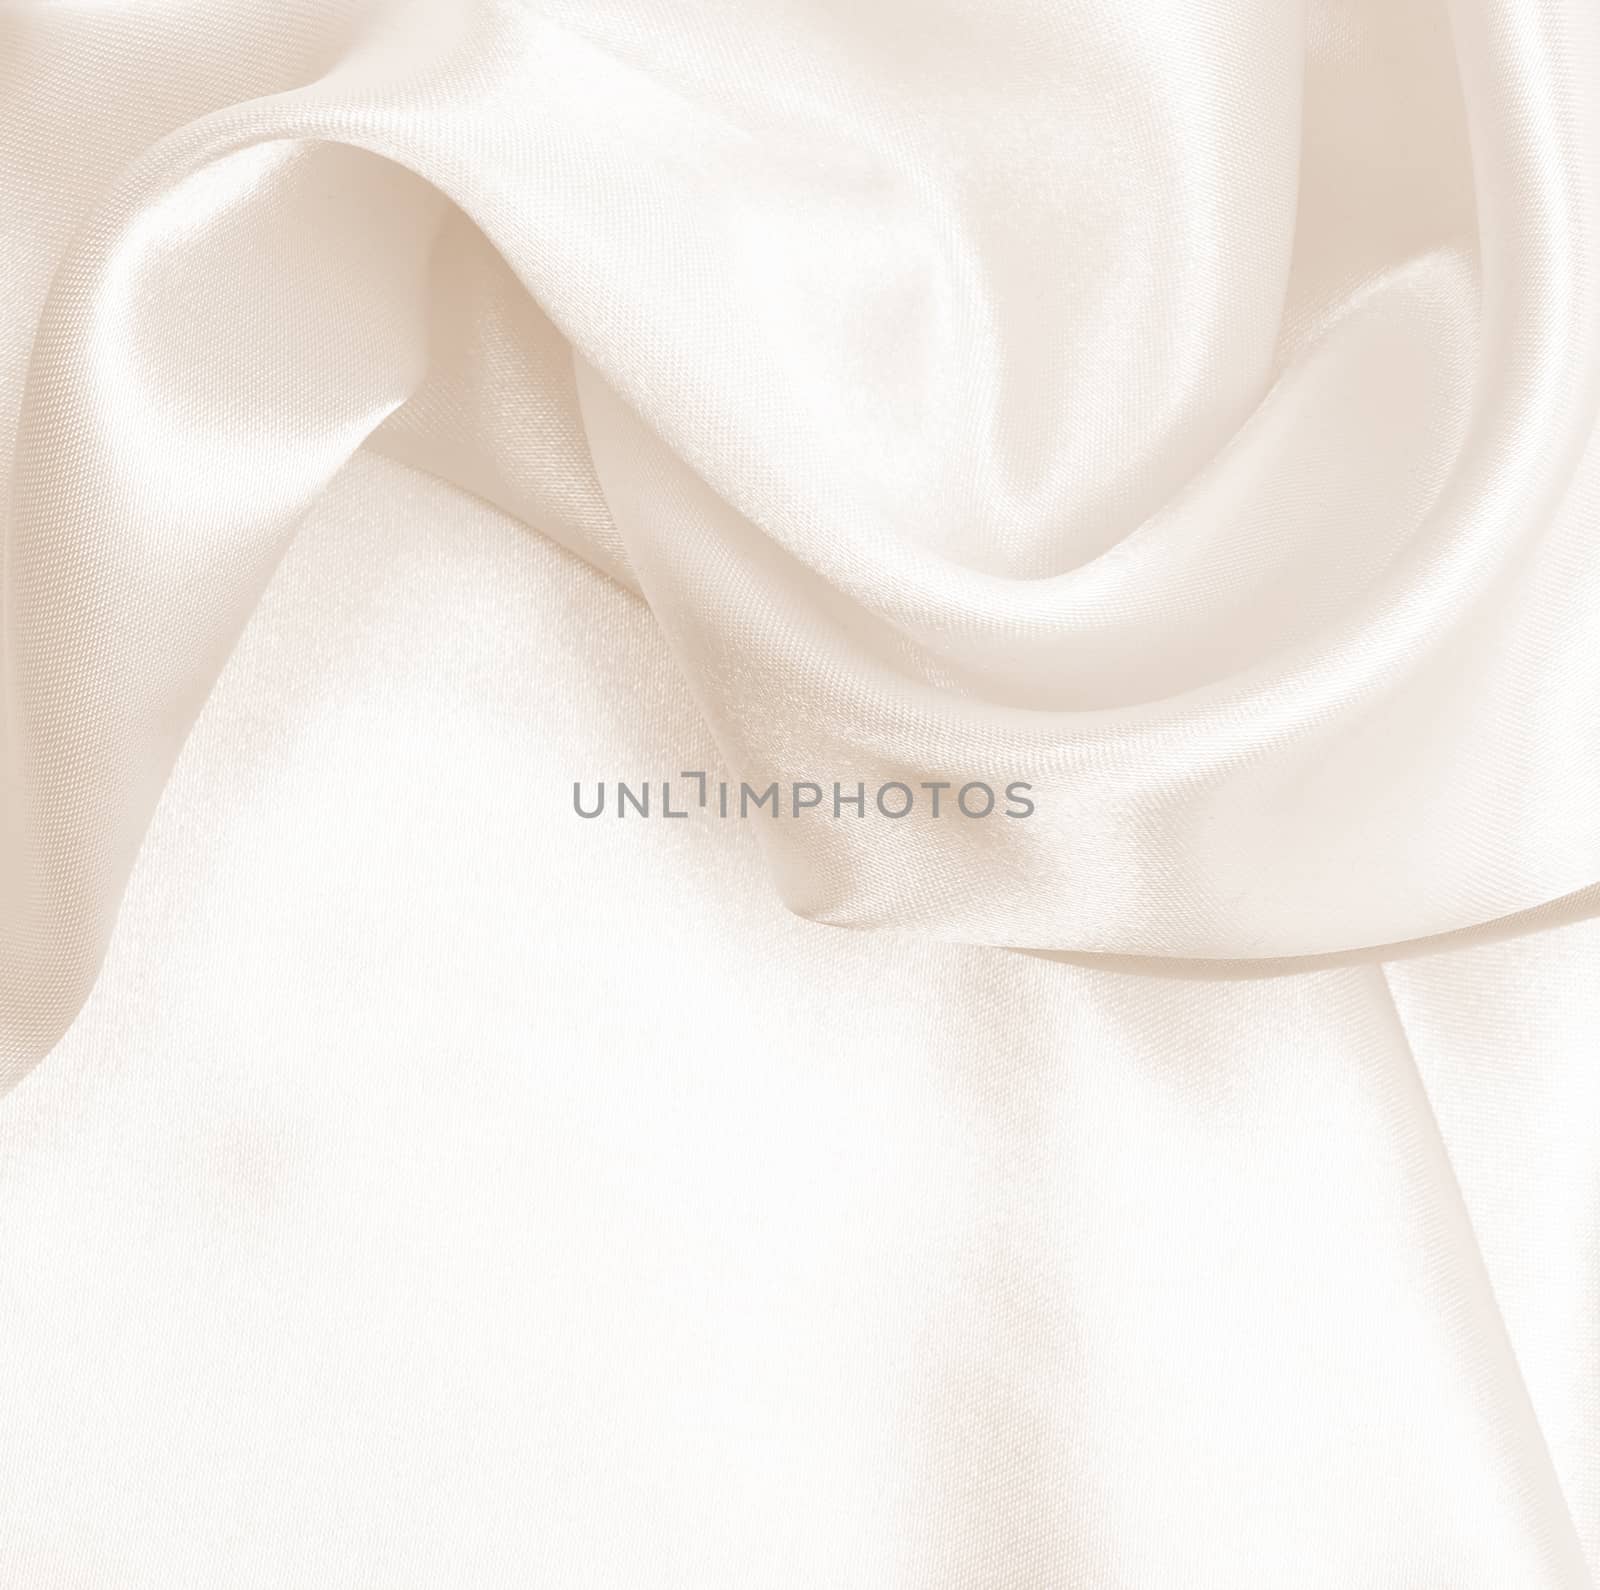 Smooth elegant golden silk or satin can use as wedding background. In Sepia toned. Retro style 